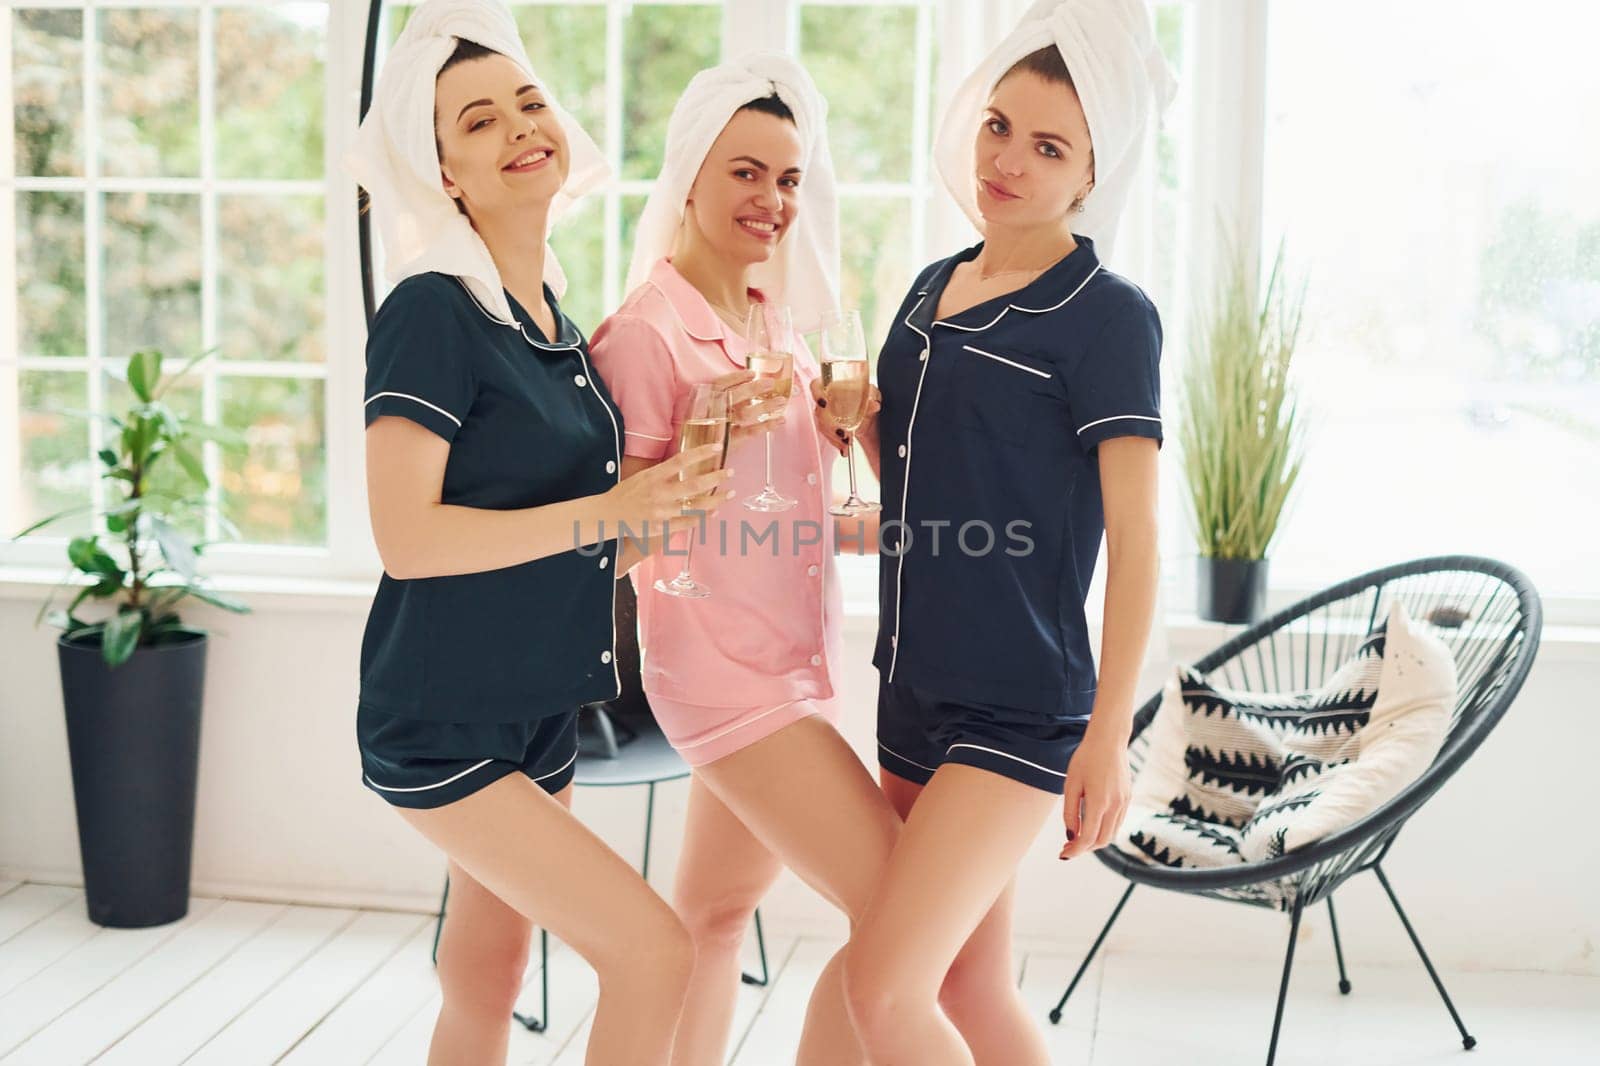 Cheerful young women in pajamas having fun indoors at daytime together by Standret